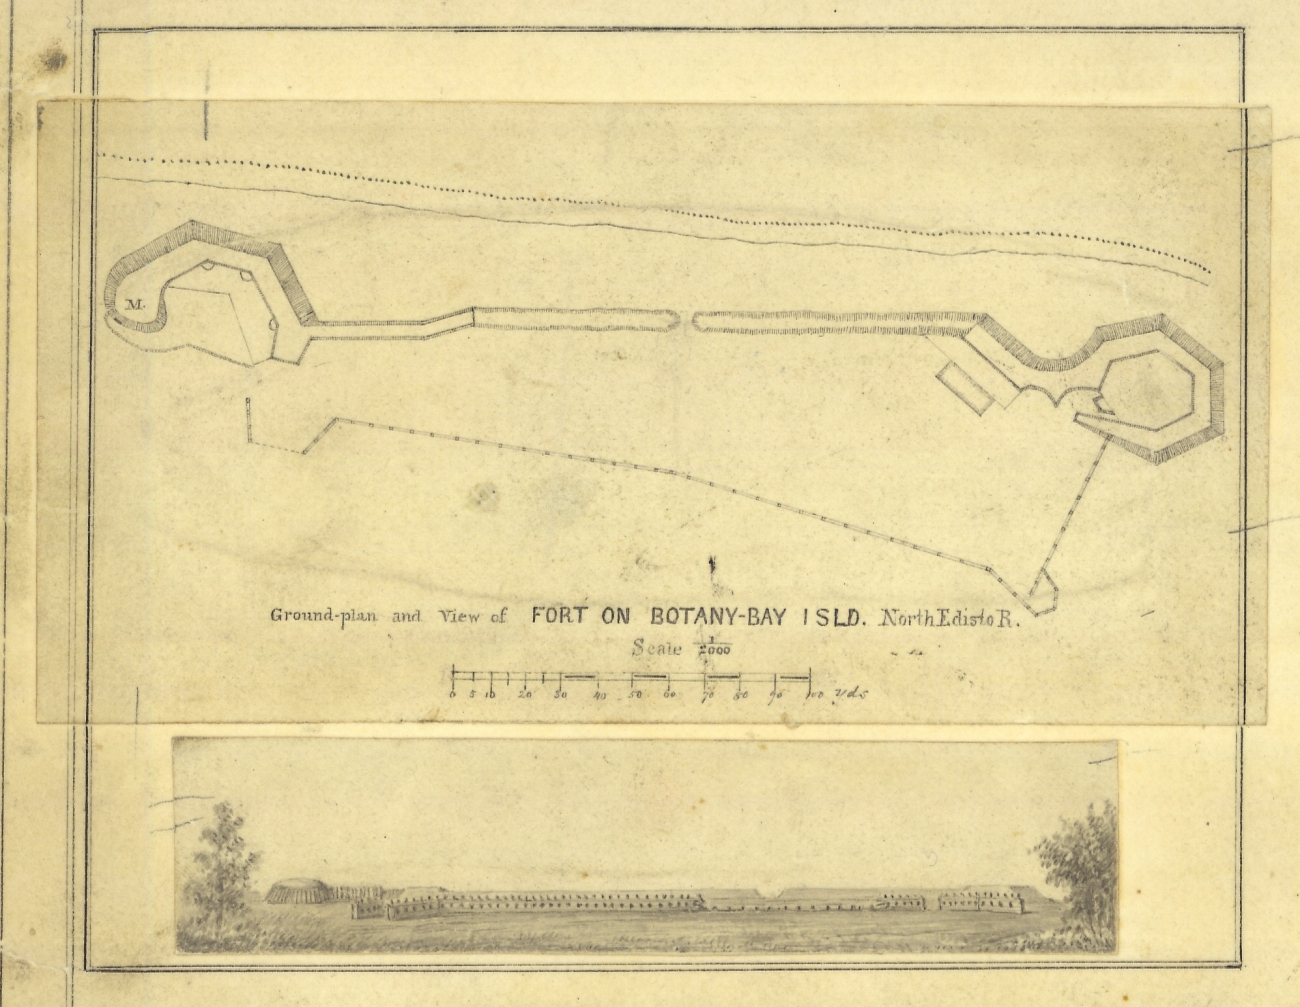 Blowup ground plan and view of Fort on Botany - Bay Island, North Edison River